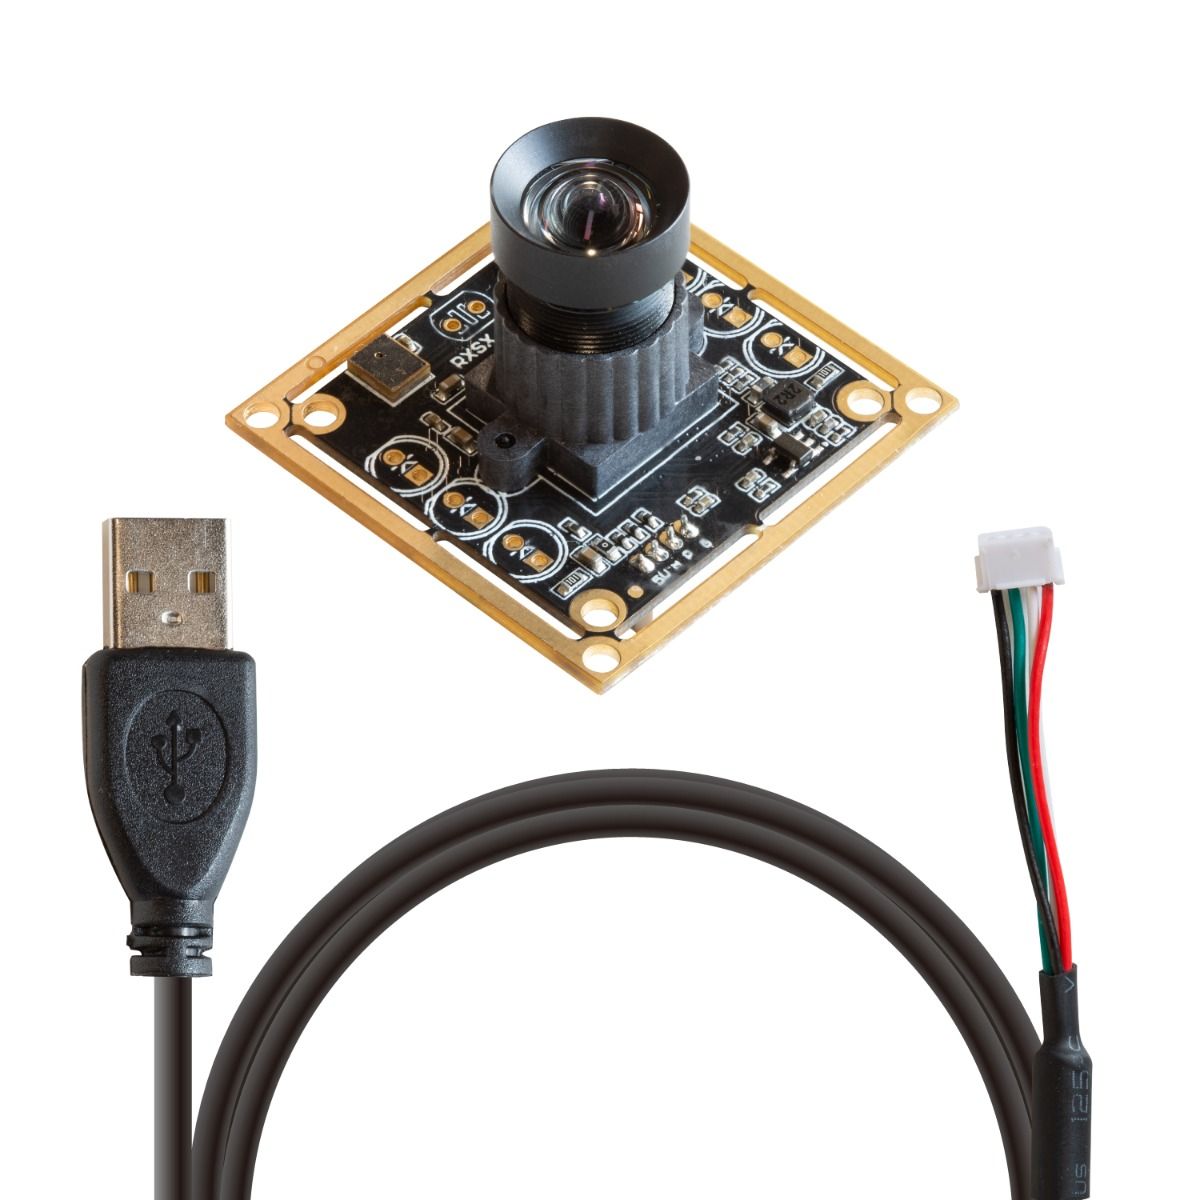 OV9281 1.0 MP Global USB Board with Distortion M12 Lens and Dual Microphones • dlscorp